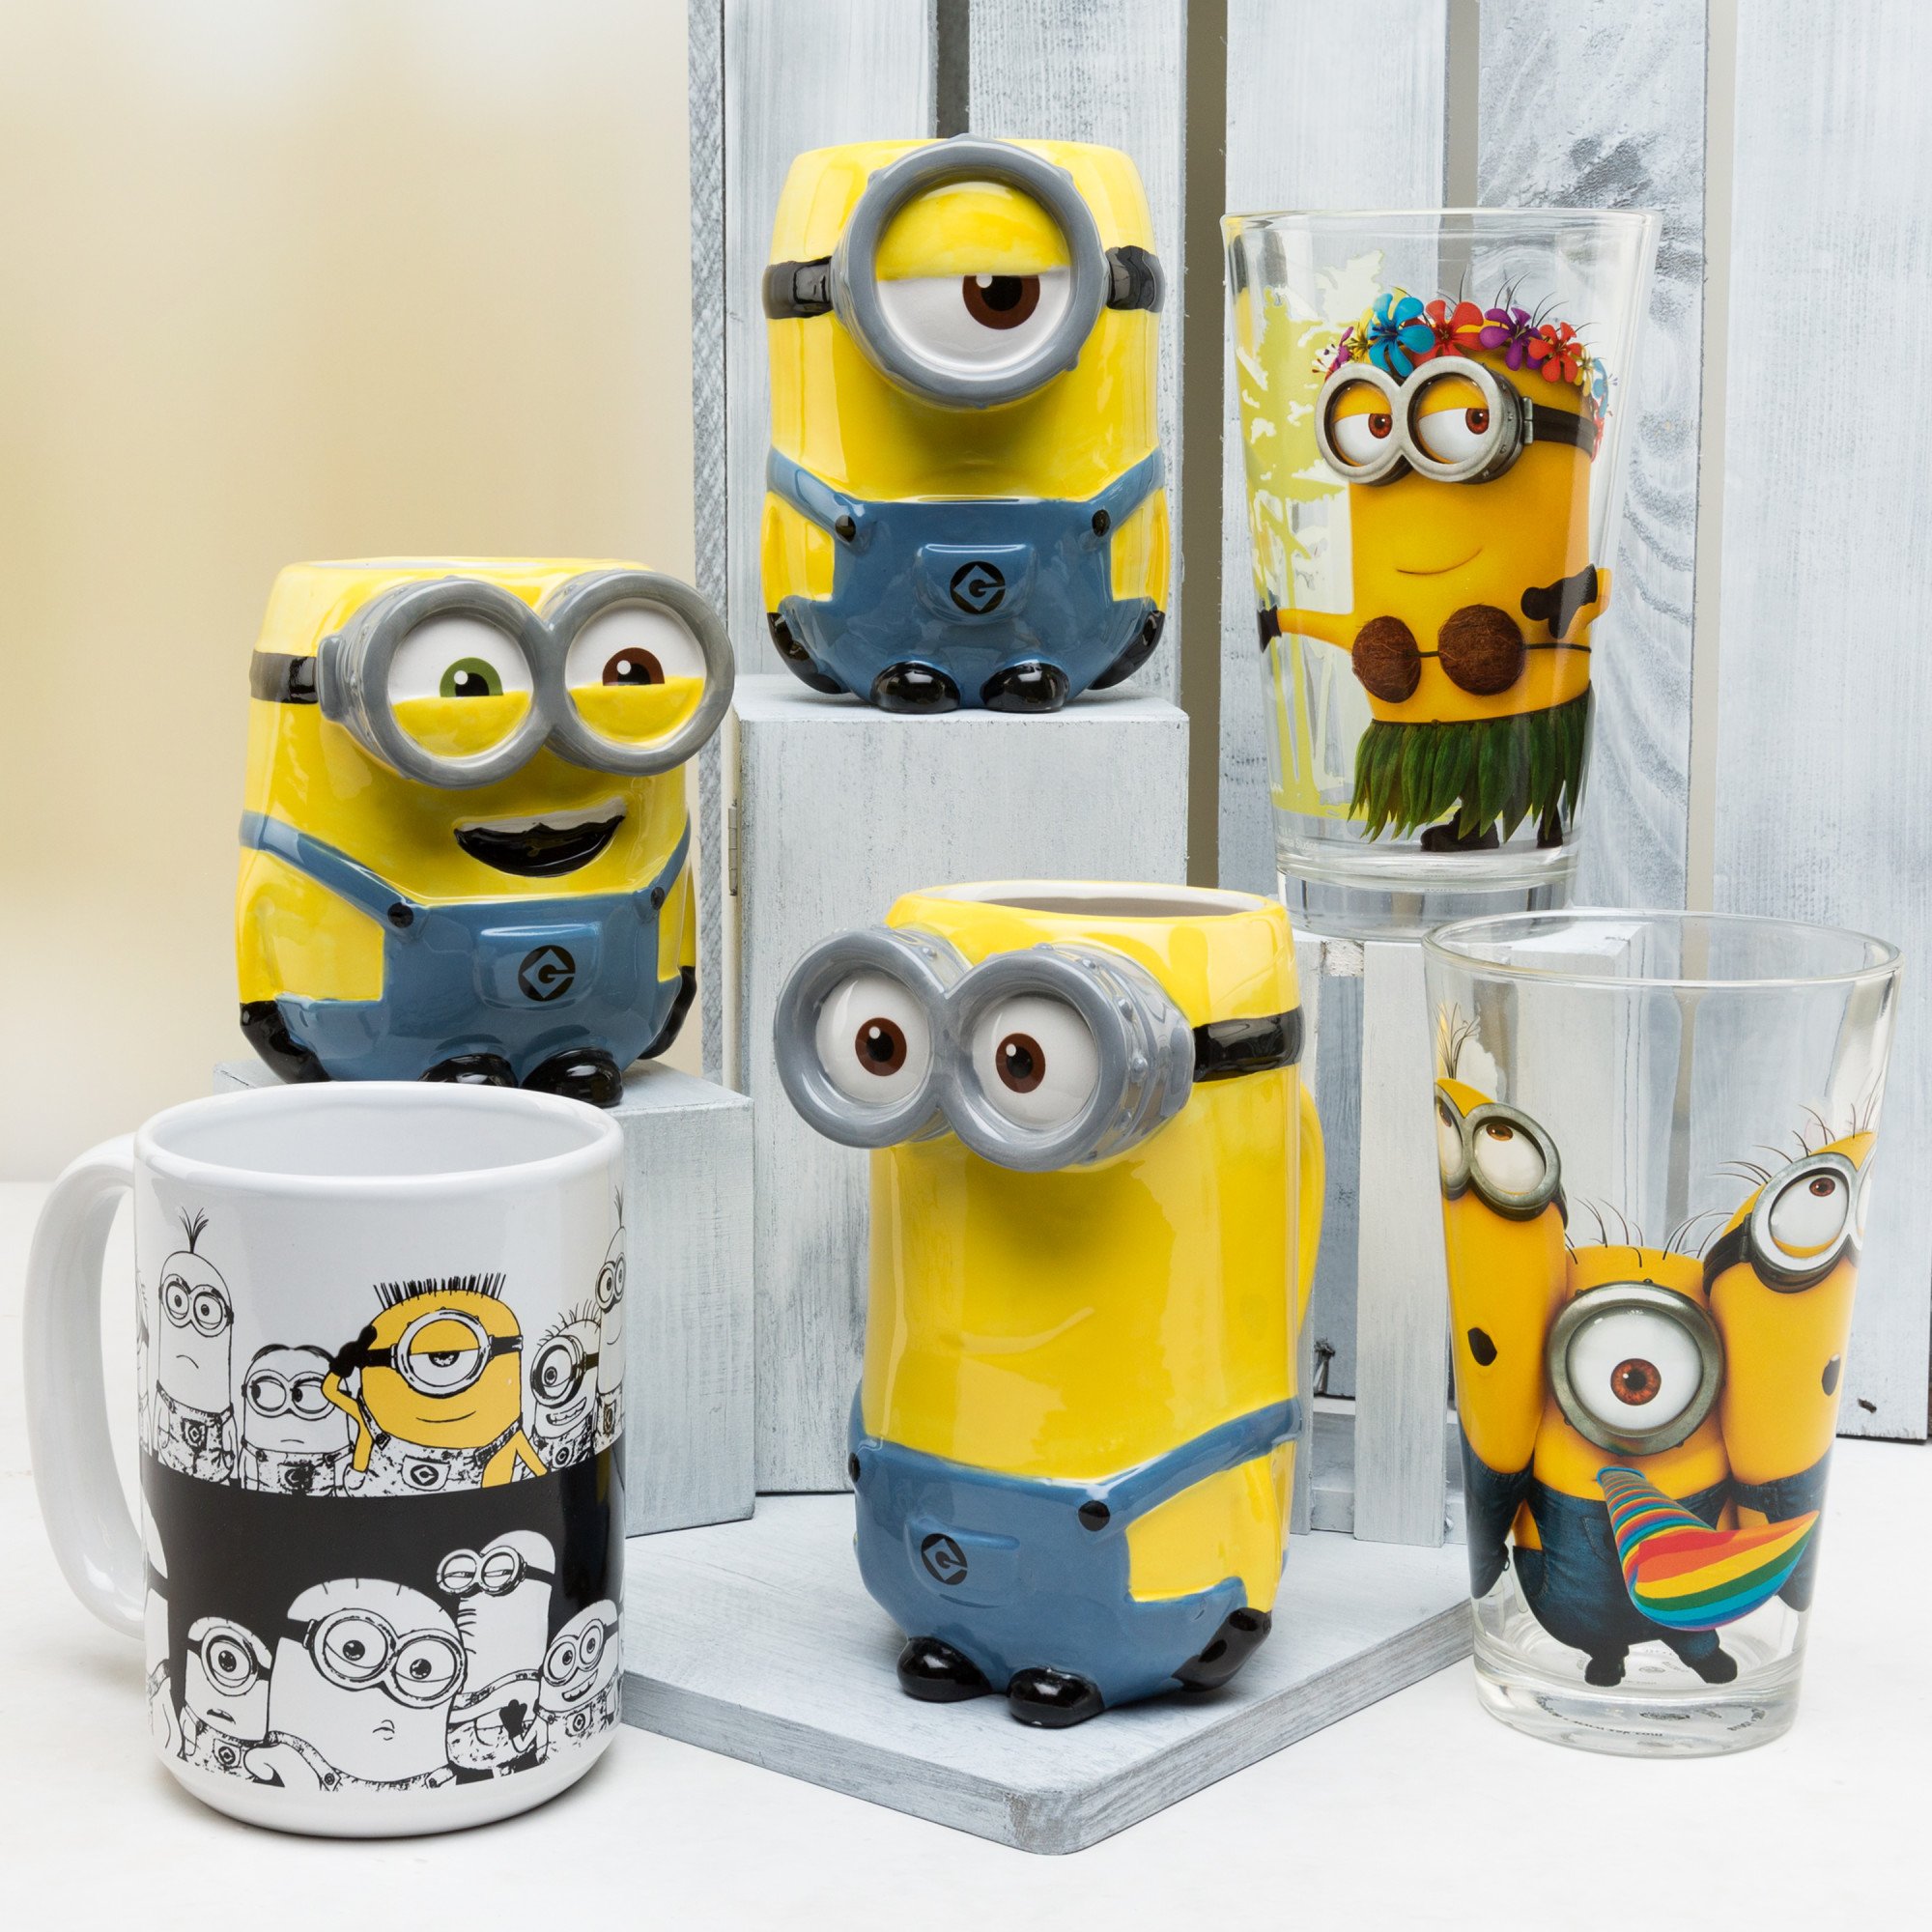 Zak Designs Despicable Me Kevin Minion 3D Sculpted Ceramic Coffee Mug for Hot Drinks, 14 oz